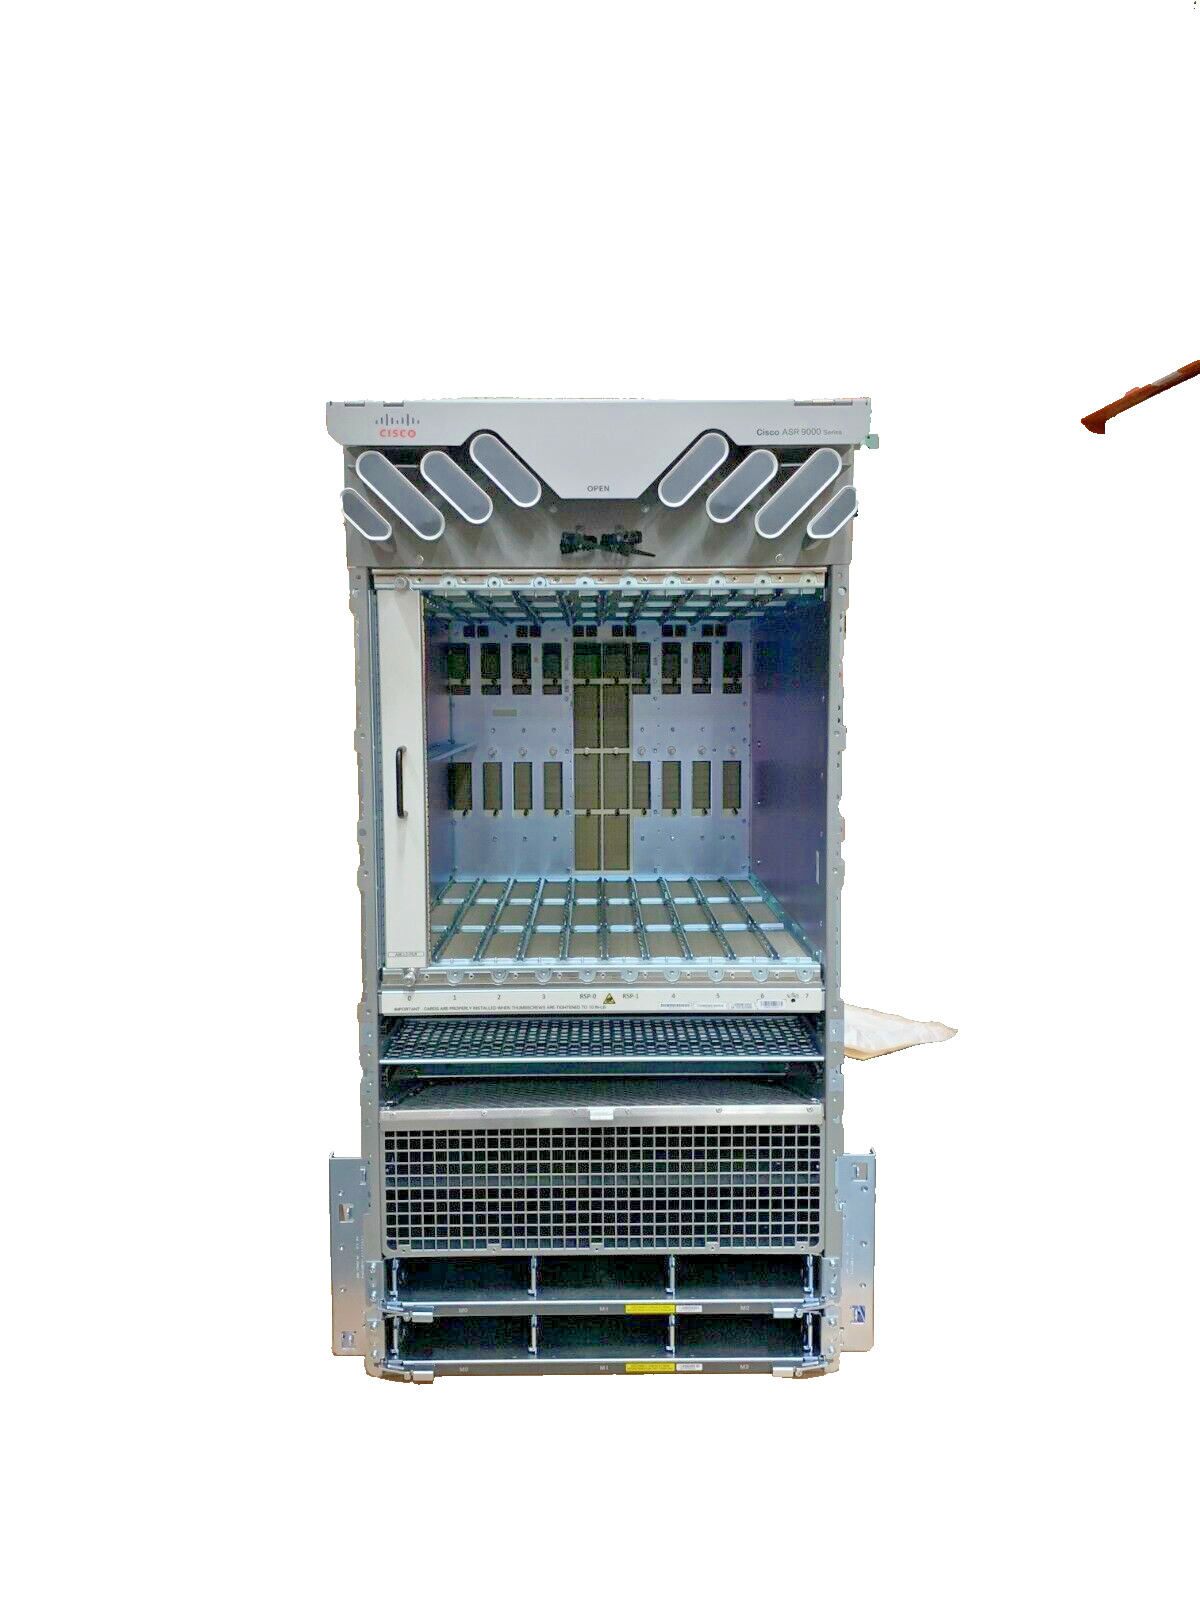 Cisco ASR-9010-AC ASR-9000 Series Chassis